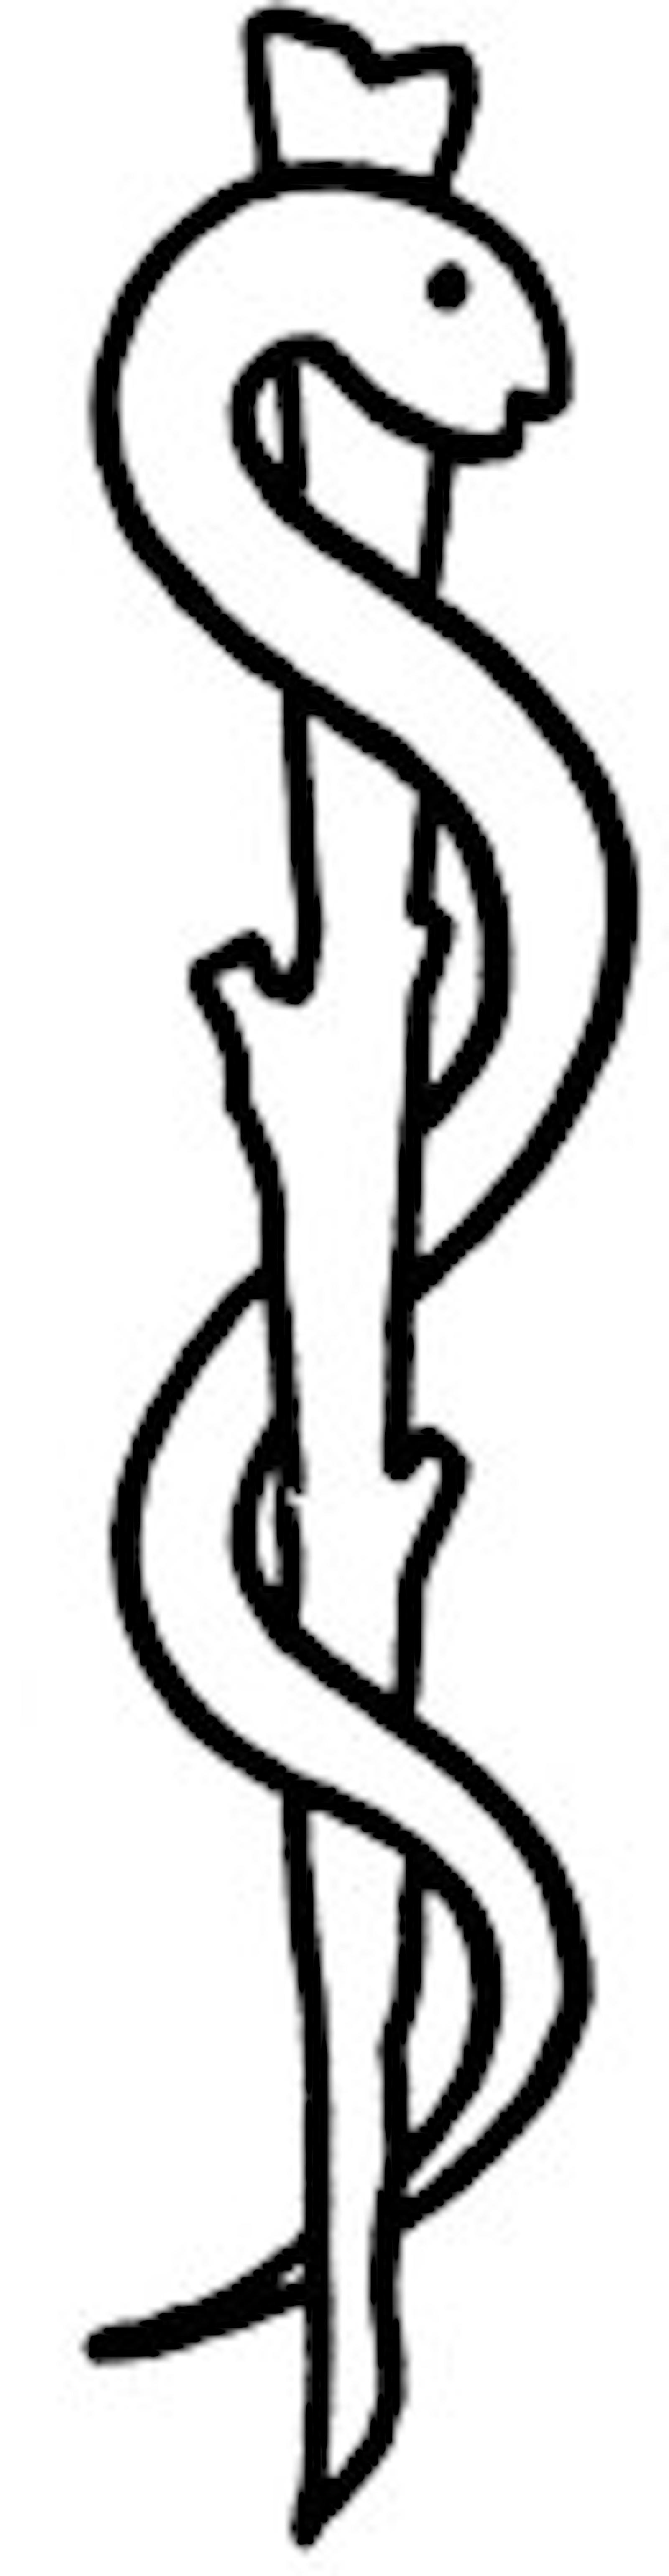 medical symbol nace sketch – Tattoo Picture at CheckoutMyInk.com |  Heartagram tattoo, Picture tattoos, Medical tattoo